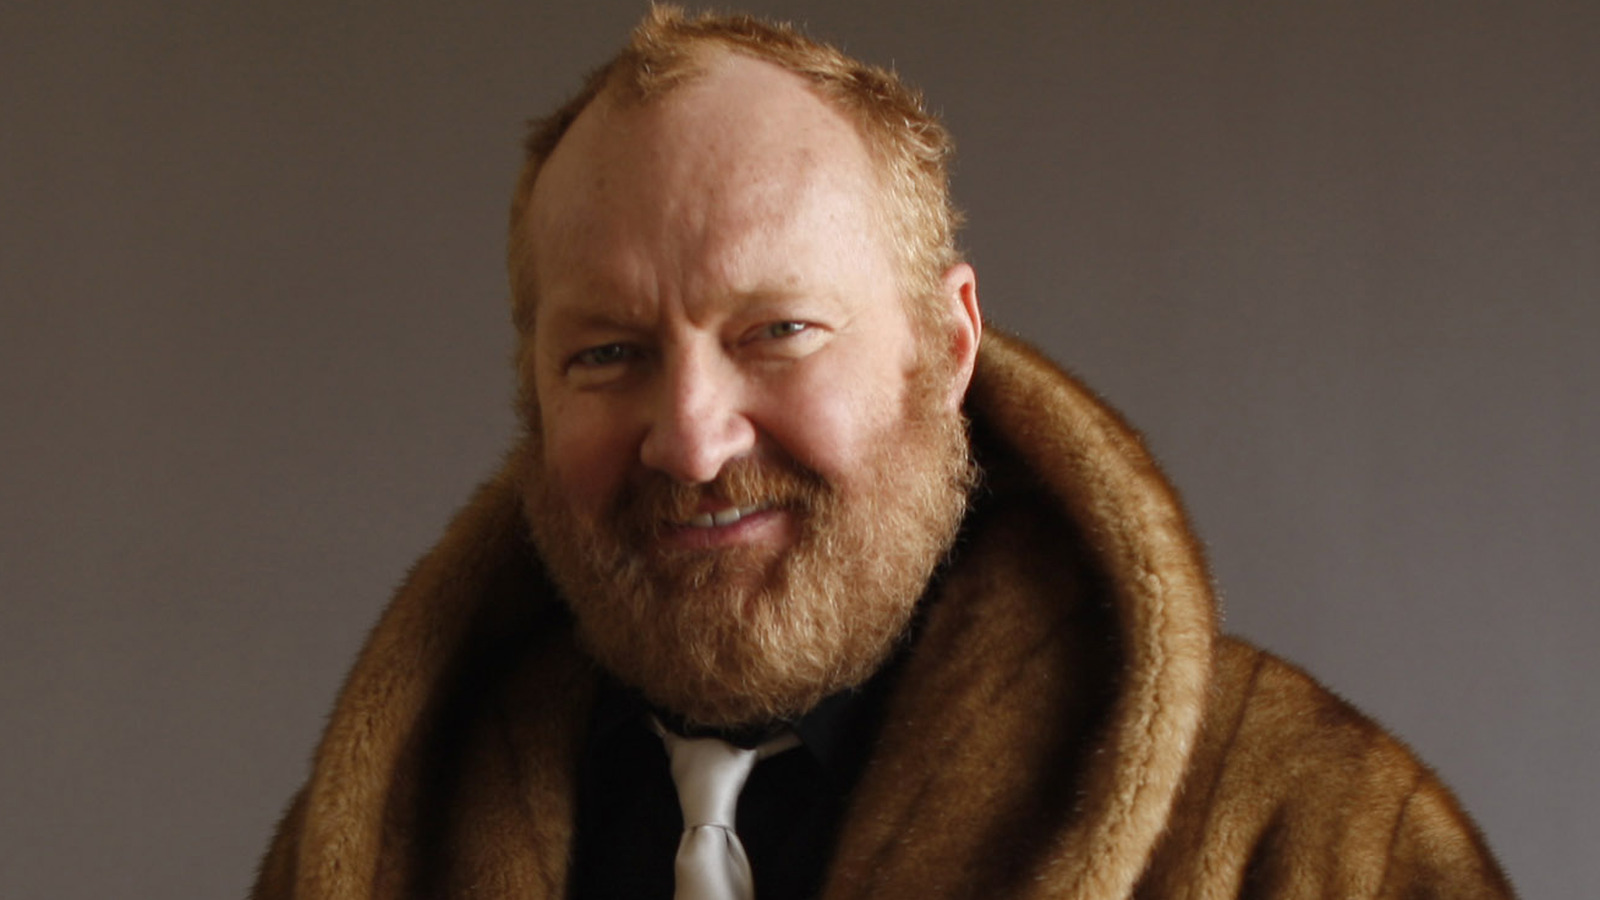 ananda bhattacharya recommends randy quaid sex tapes pic